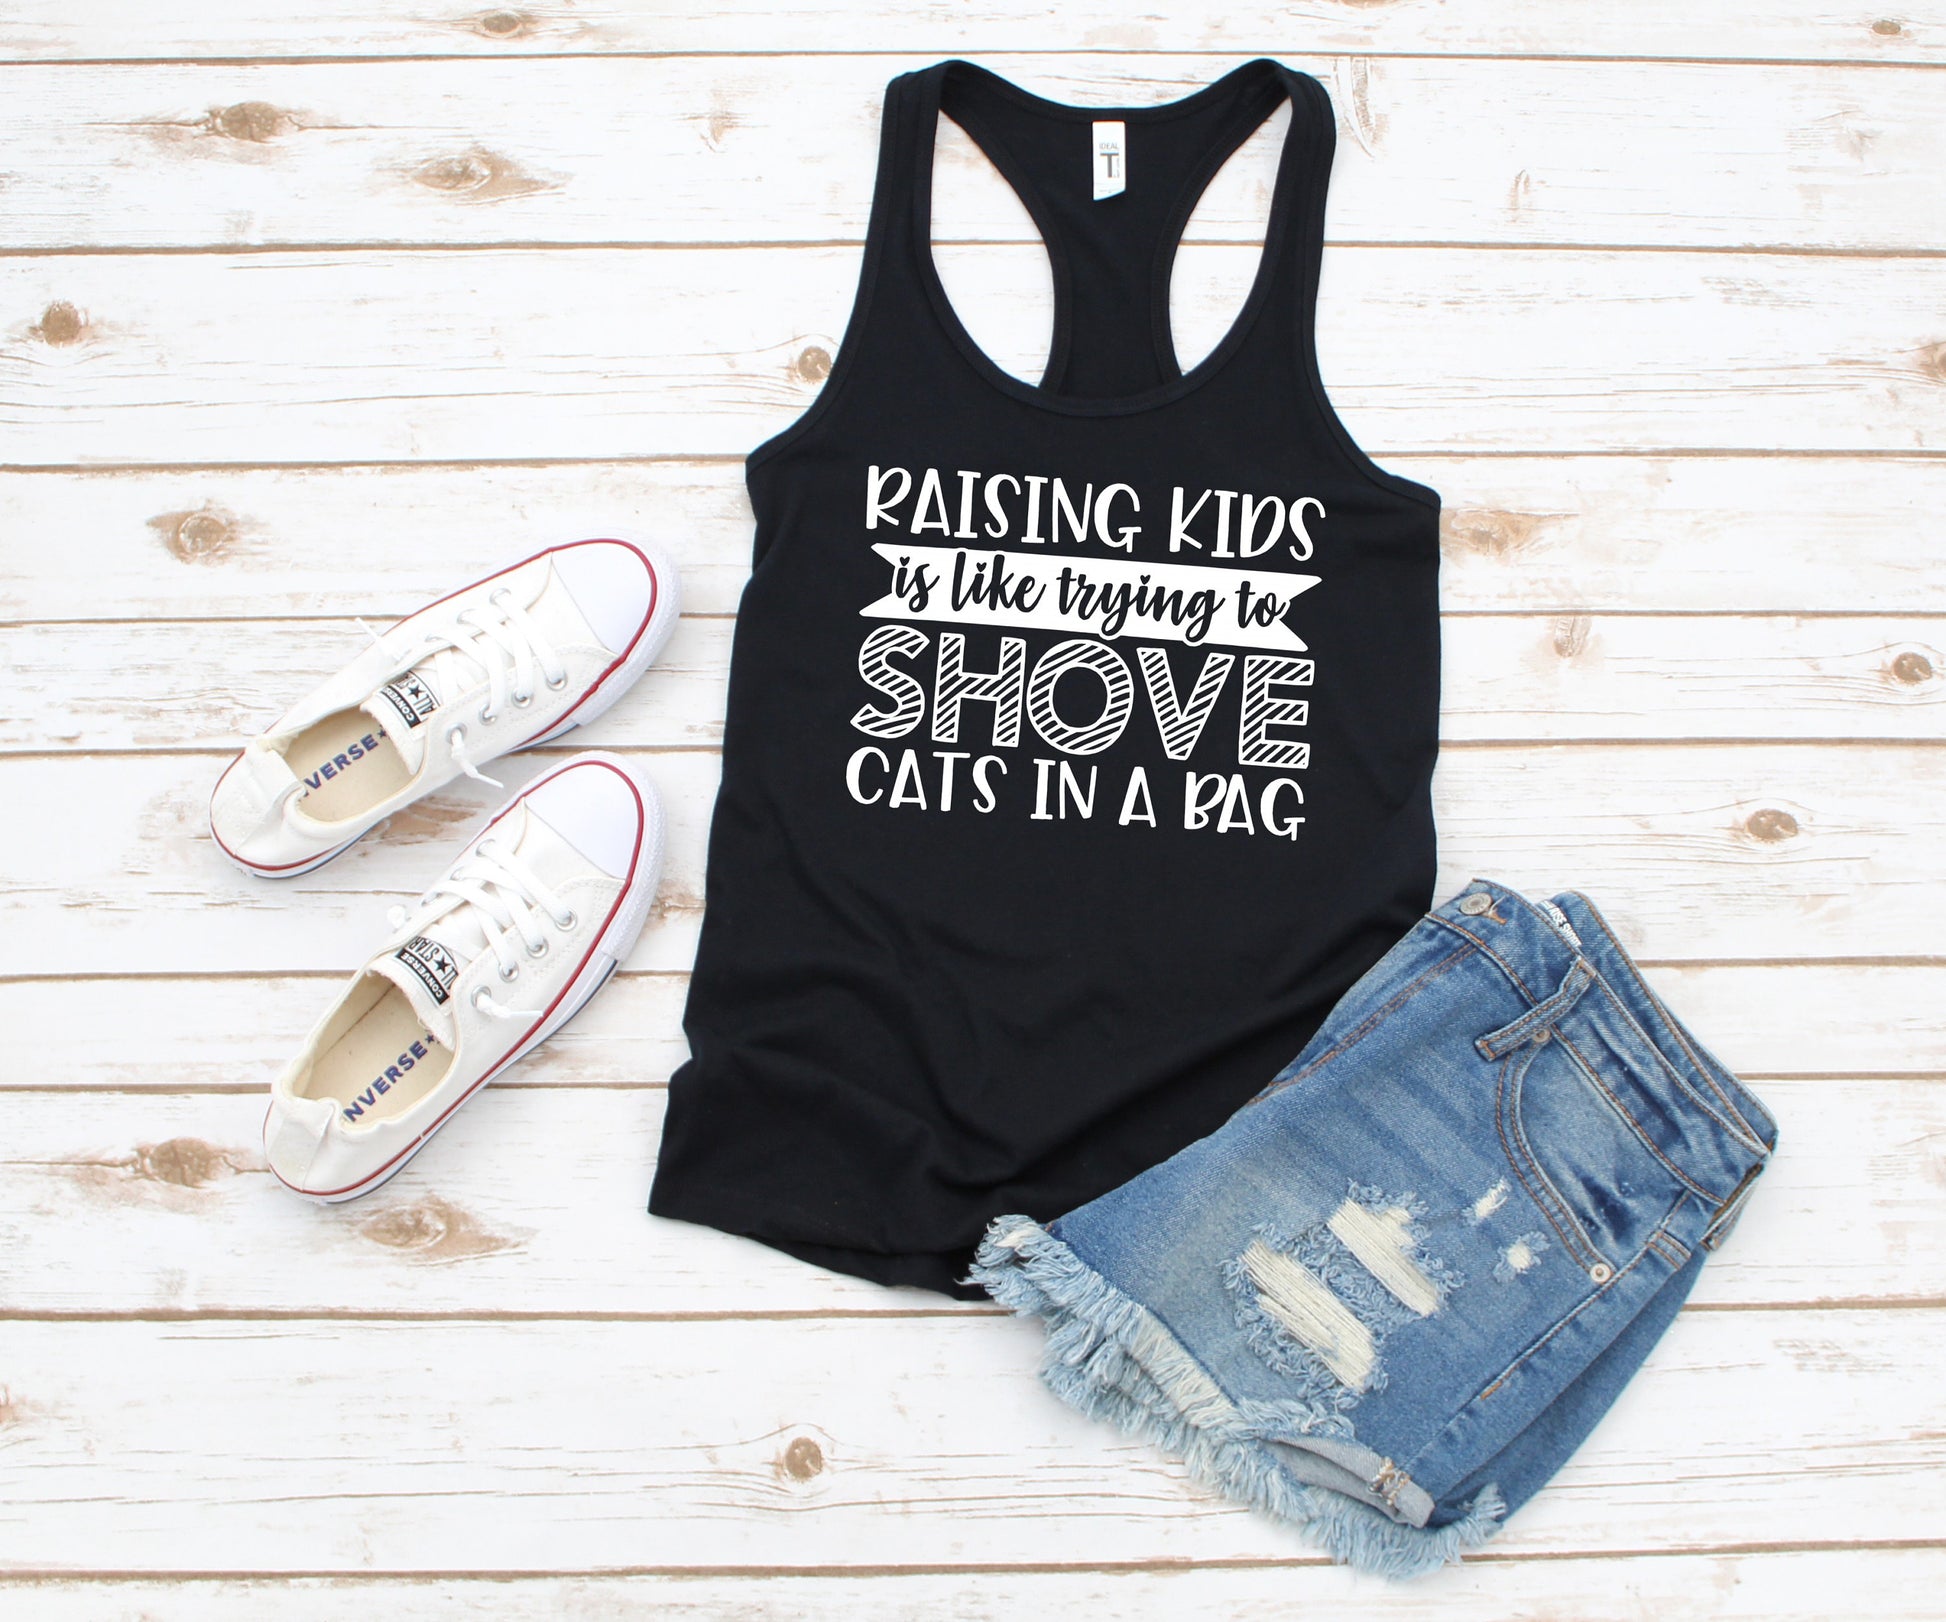 Raising Kids is Like Trying to Shove Cats in A Bag racerback tank t-shirt - funny mom shirt - toddler mom shirt - twin mom - triplet mom